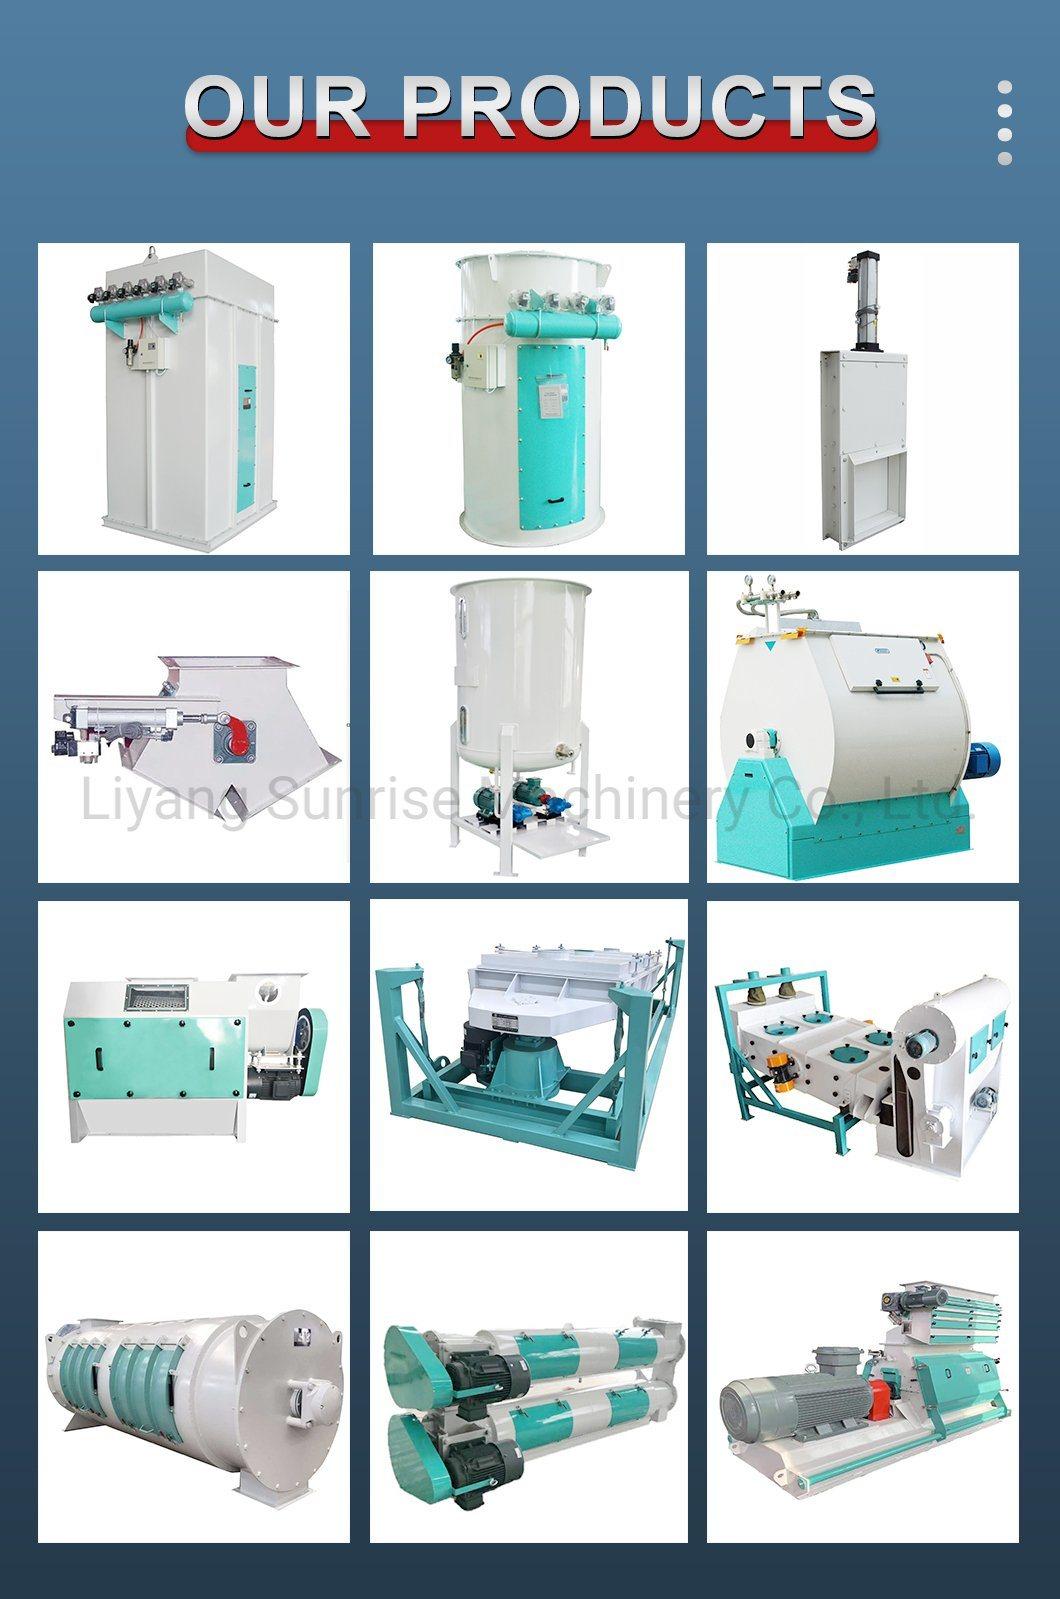 High Efficiency Dedusting Equipment for Building Material, Timber and Other Industries